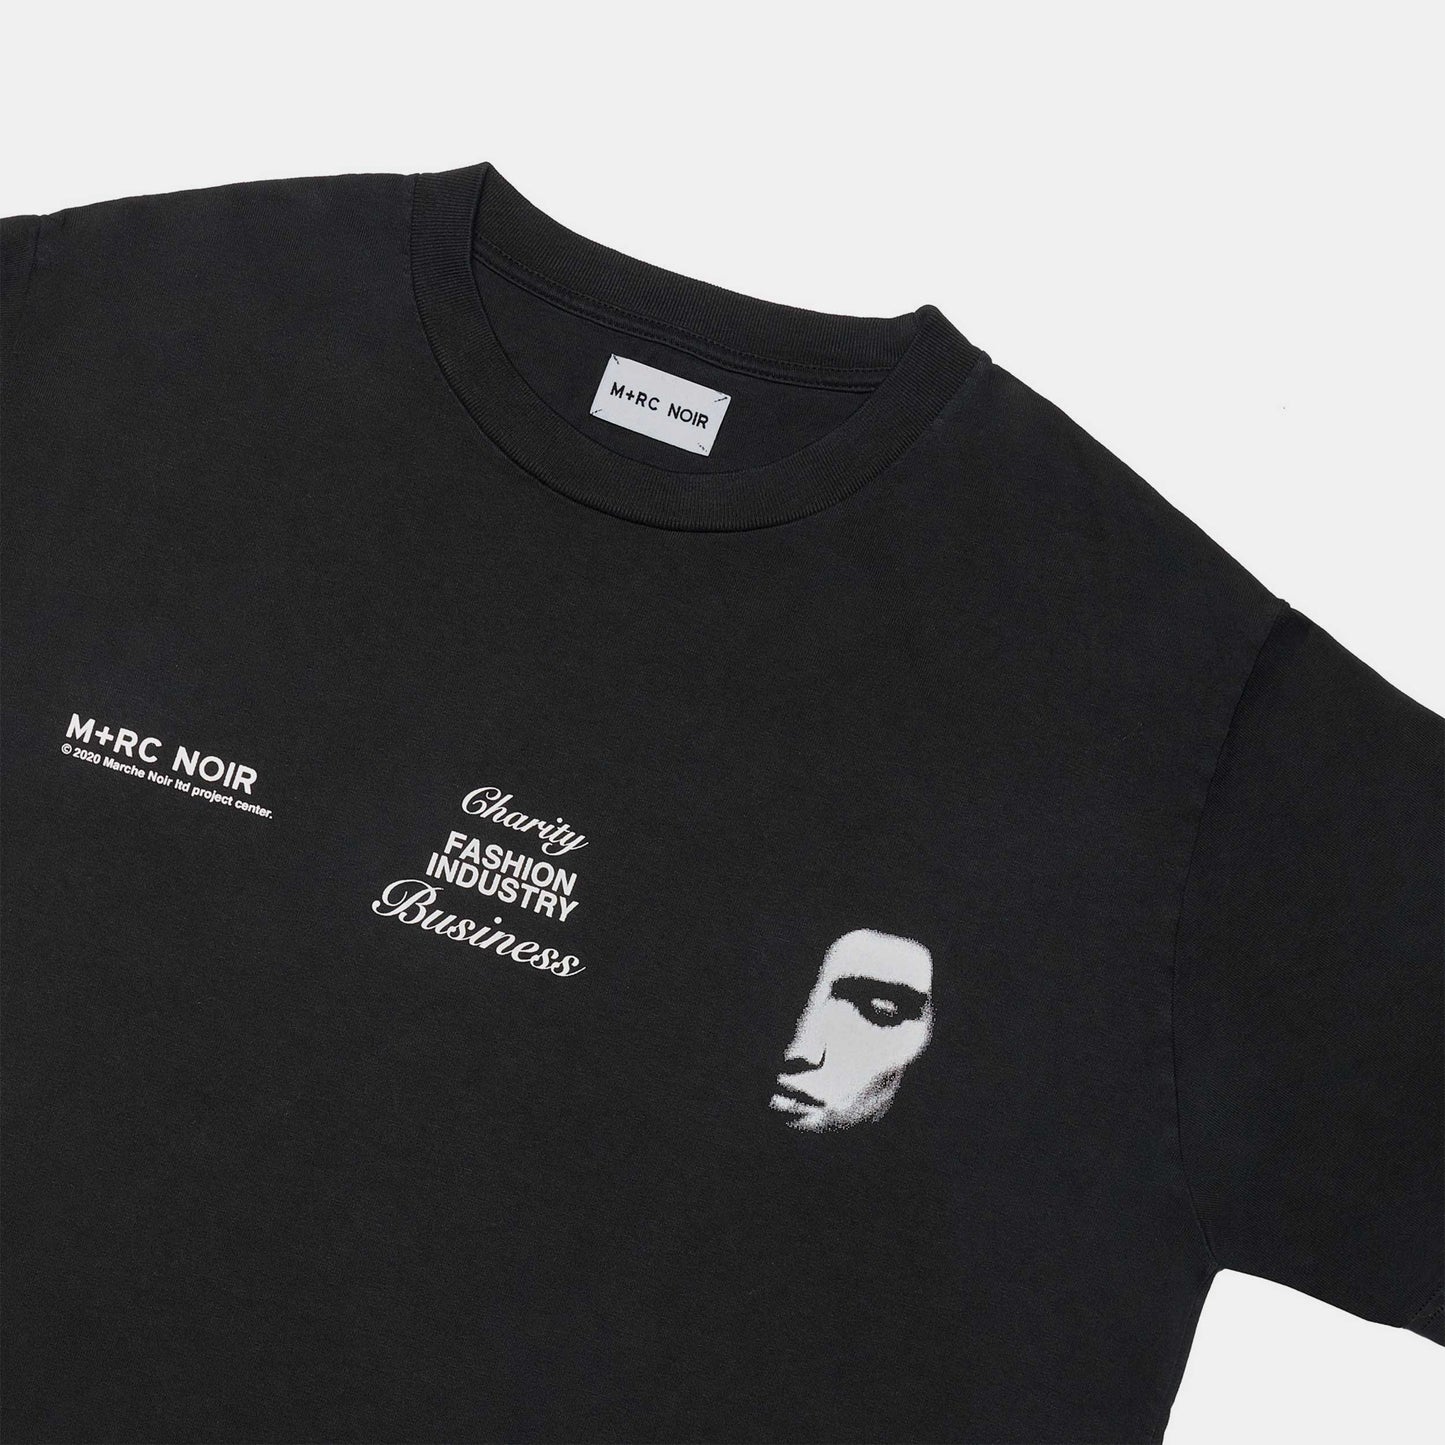 Archive "Charity business" tee